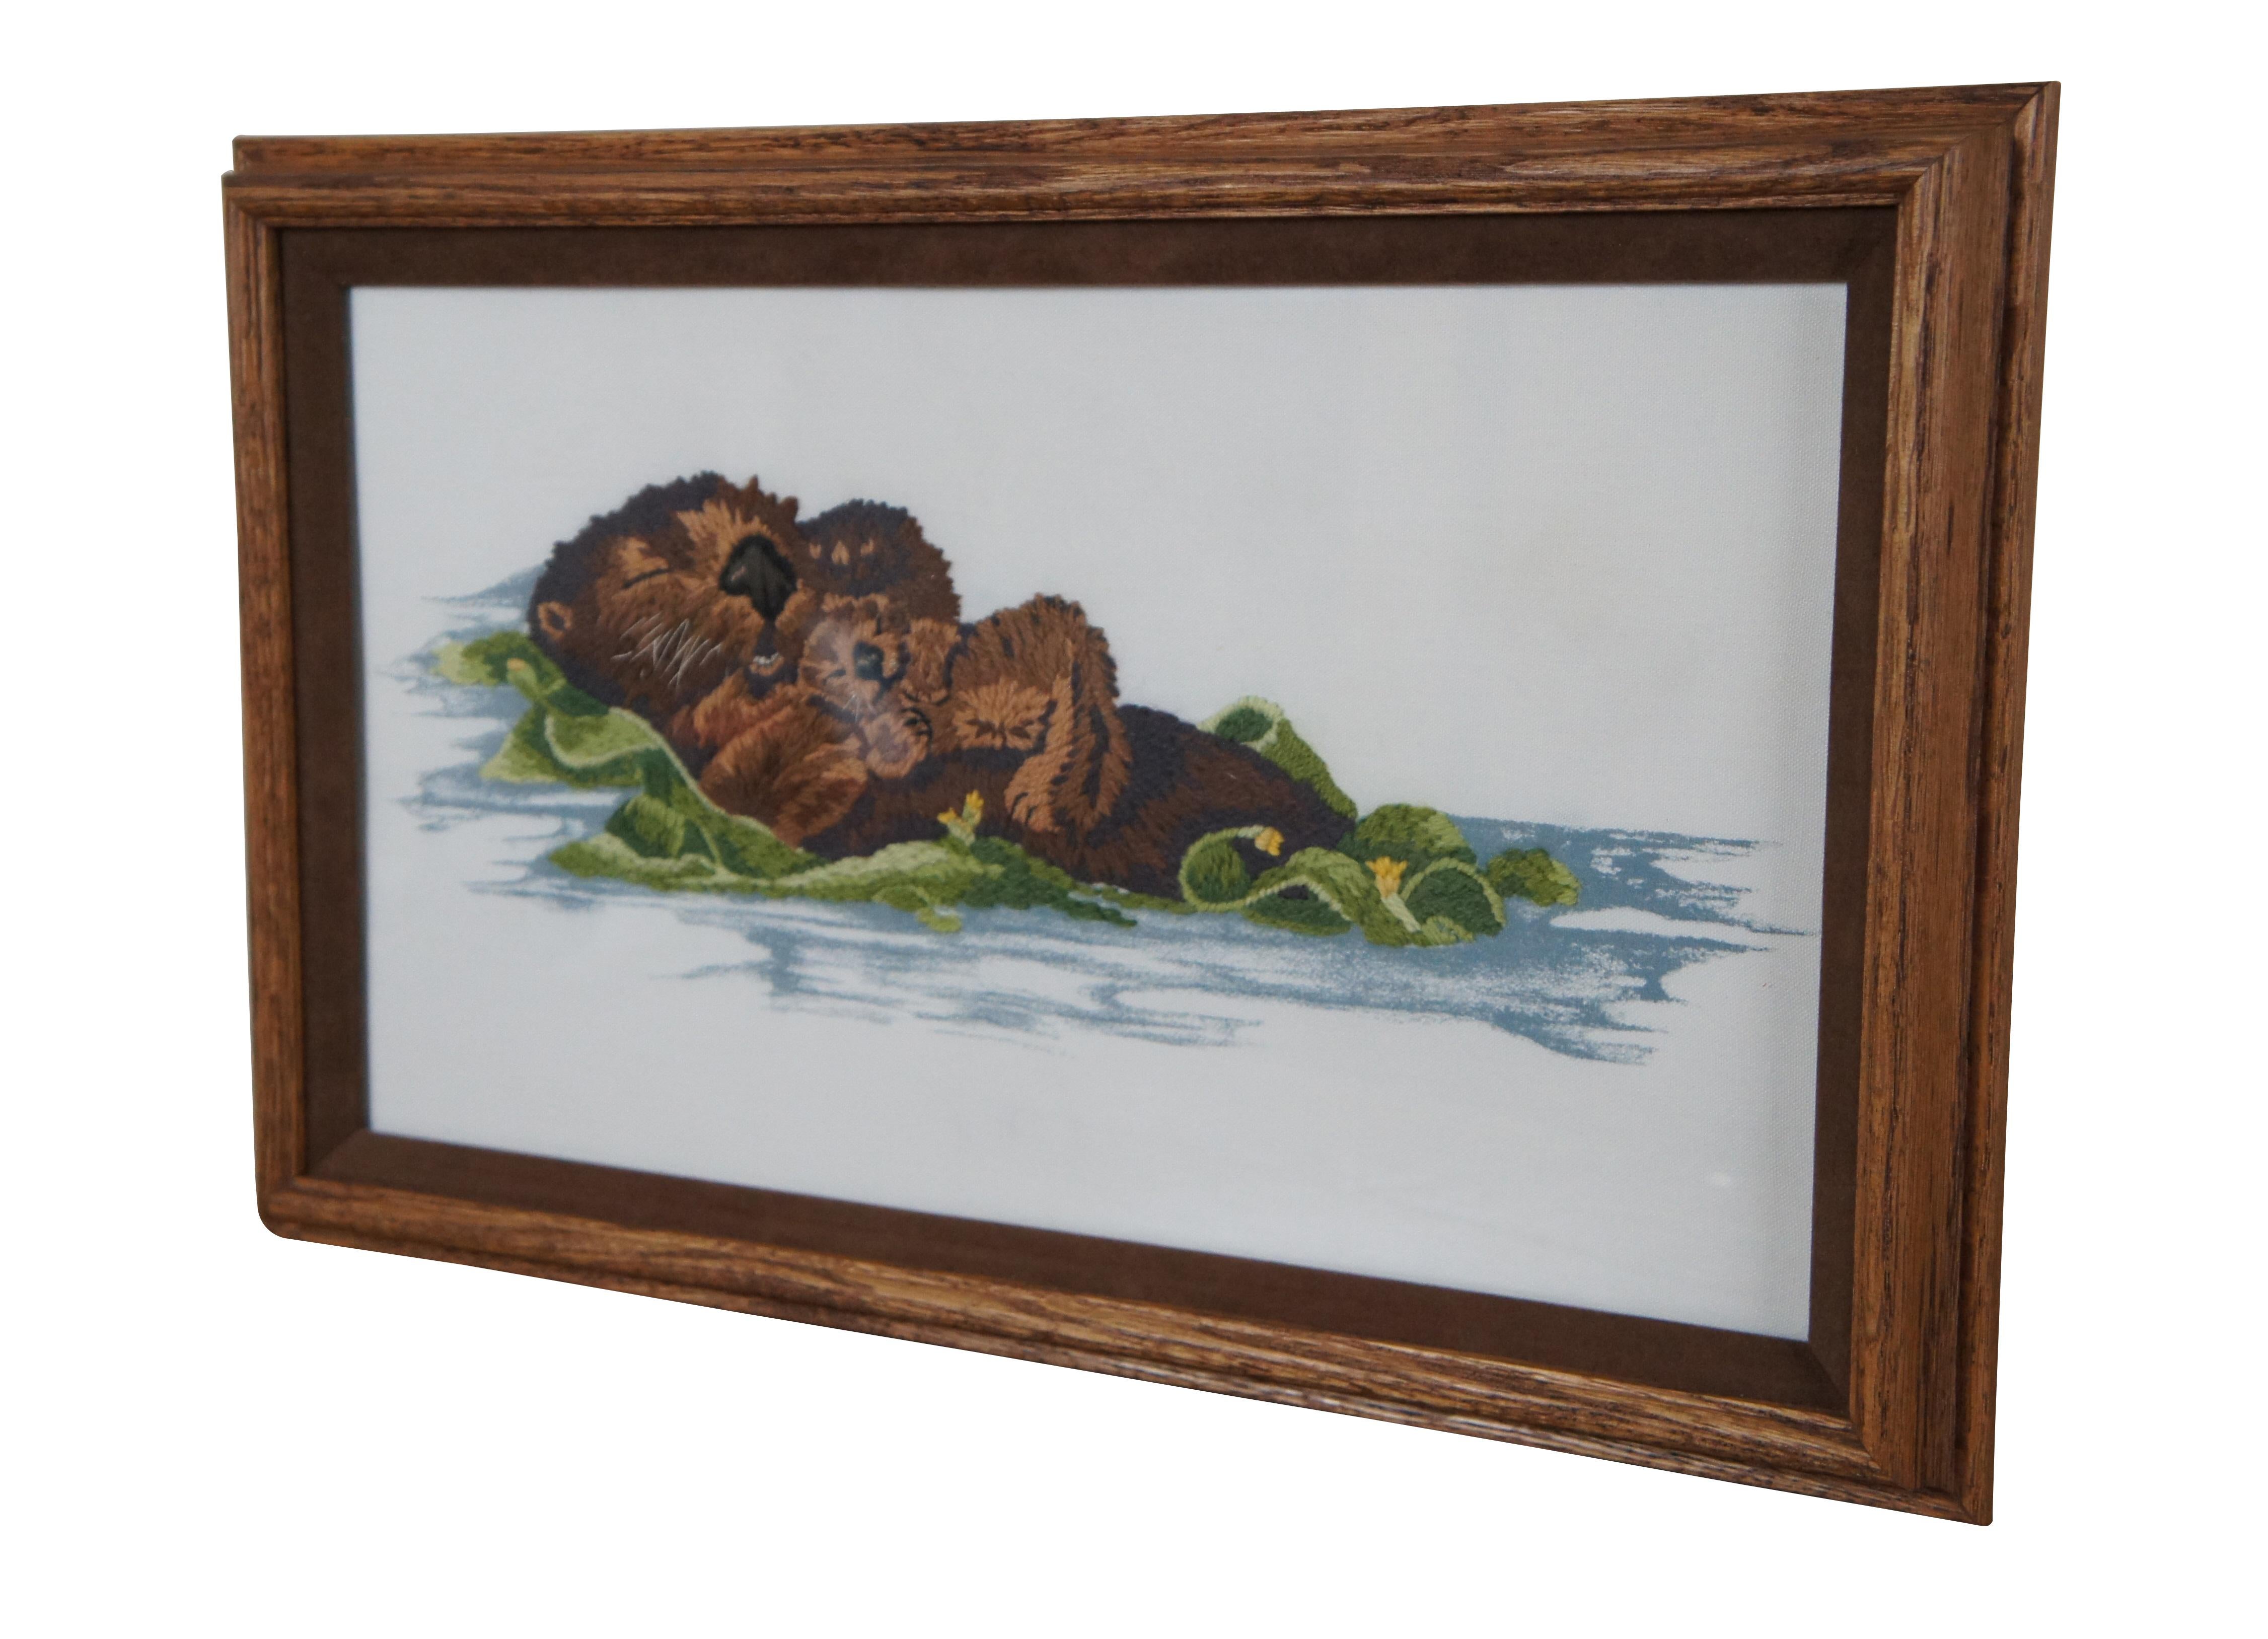 Vintage framed piece of crewel needlepoint embroidery / cross stitch art depicting a sea otter and pup floating in a bed of seaweed. Design by Virginia Miller; kit originally produced by Janlynn circa 1988.


DIMENSIONS

19.75